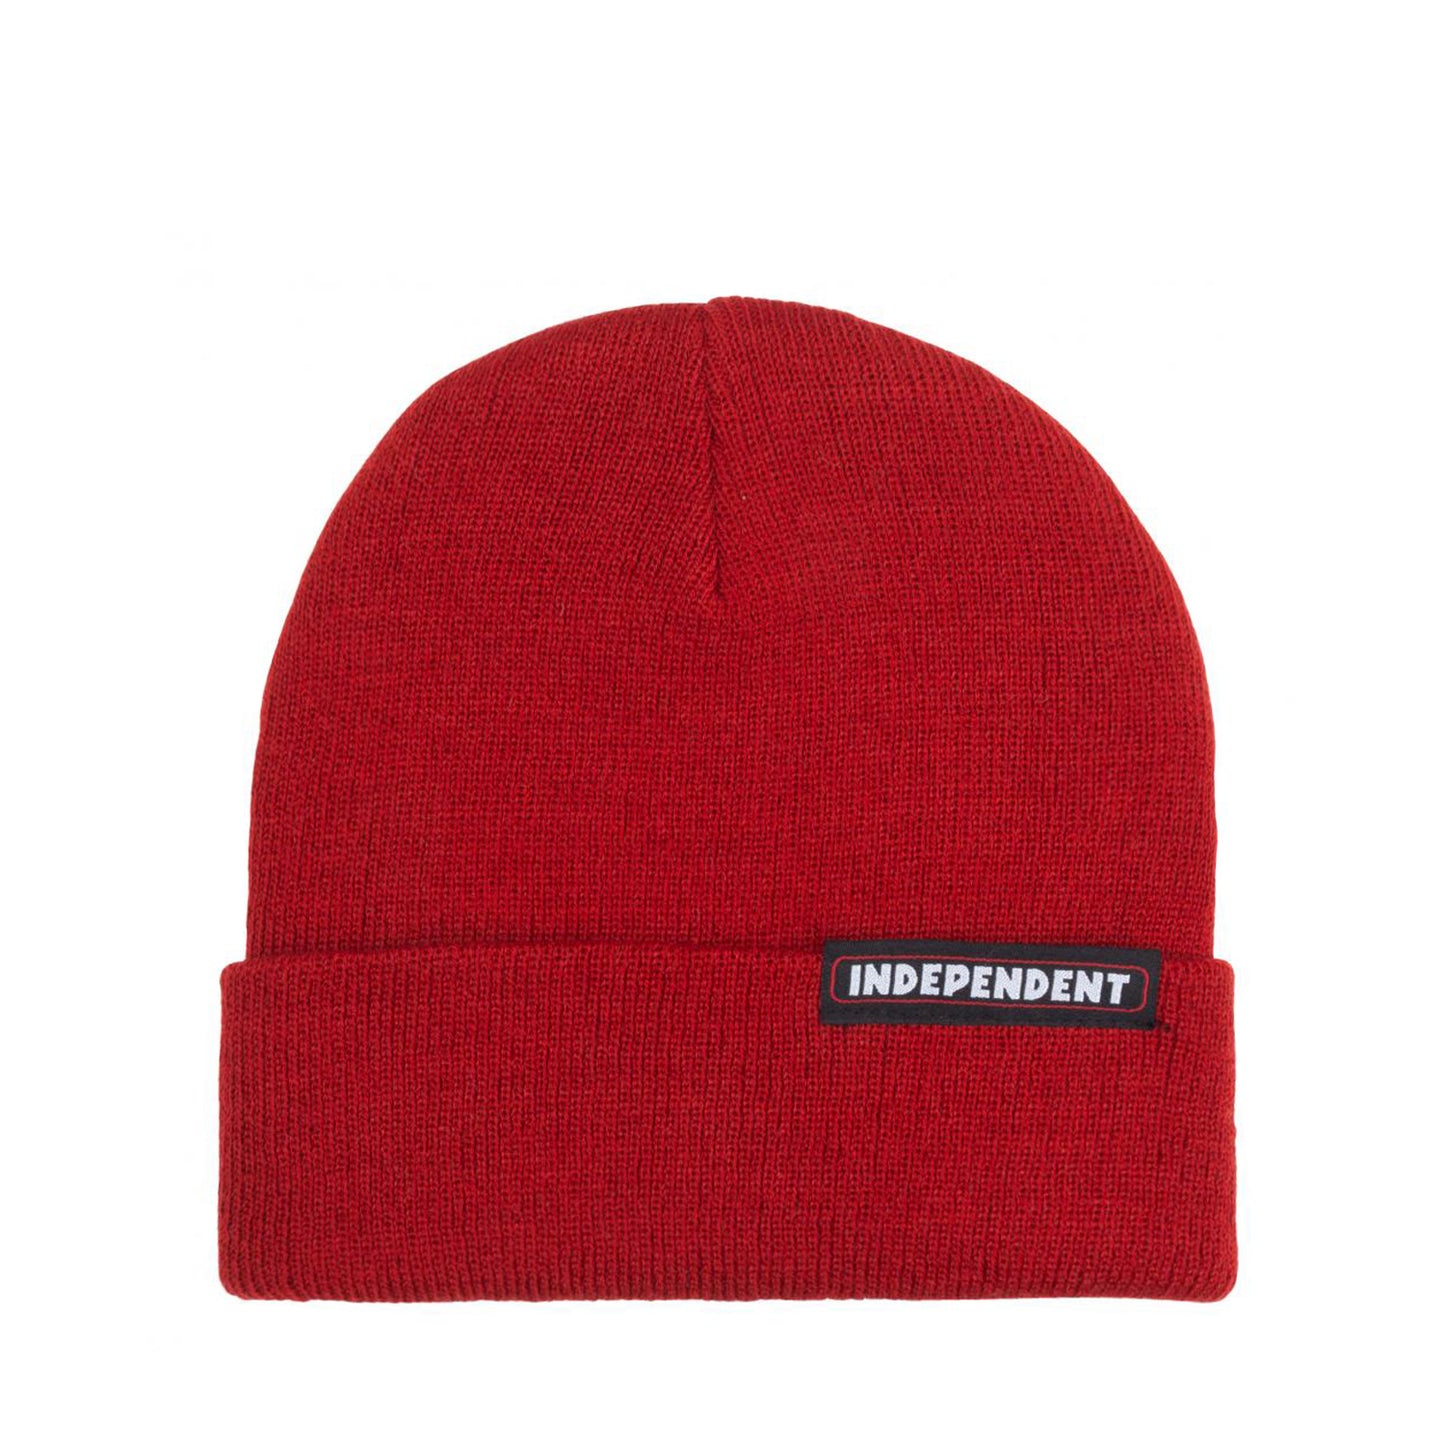 Independent Bar Beanie - Red - Prime Delux Store